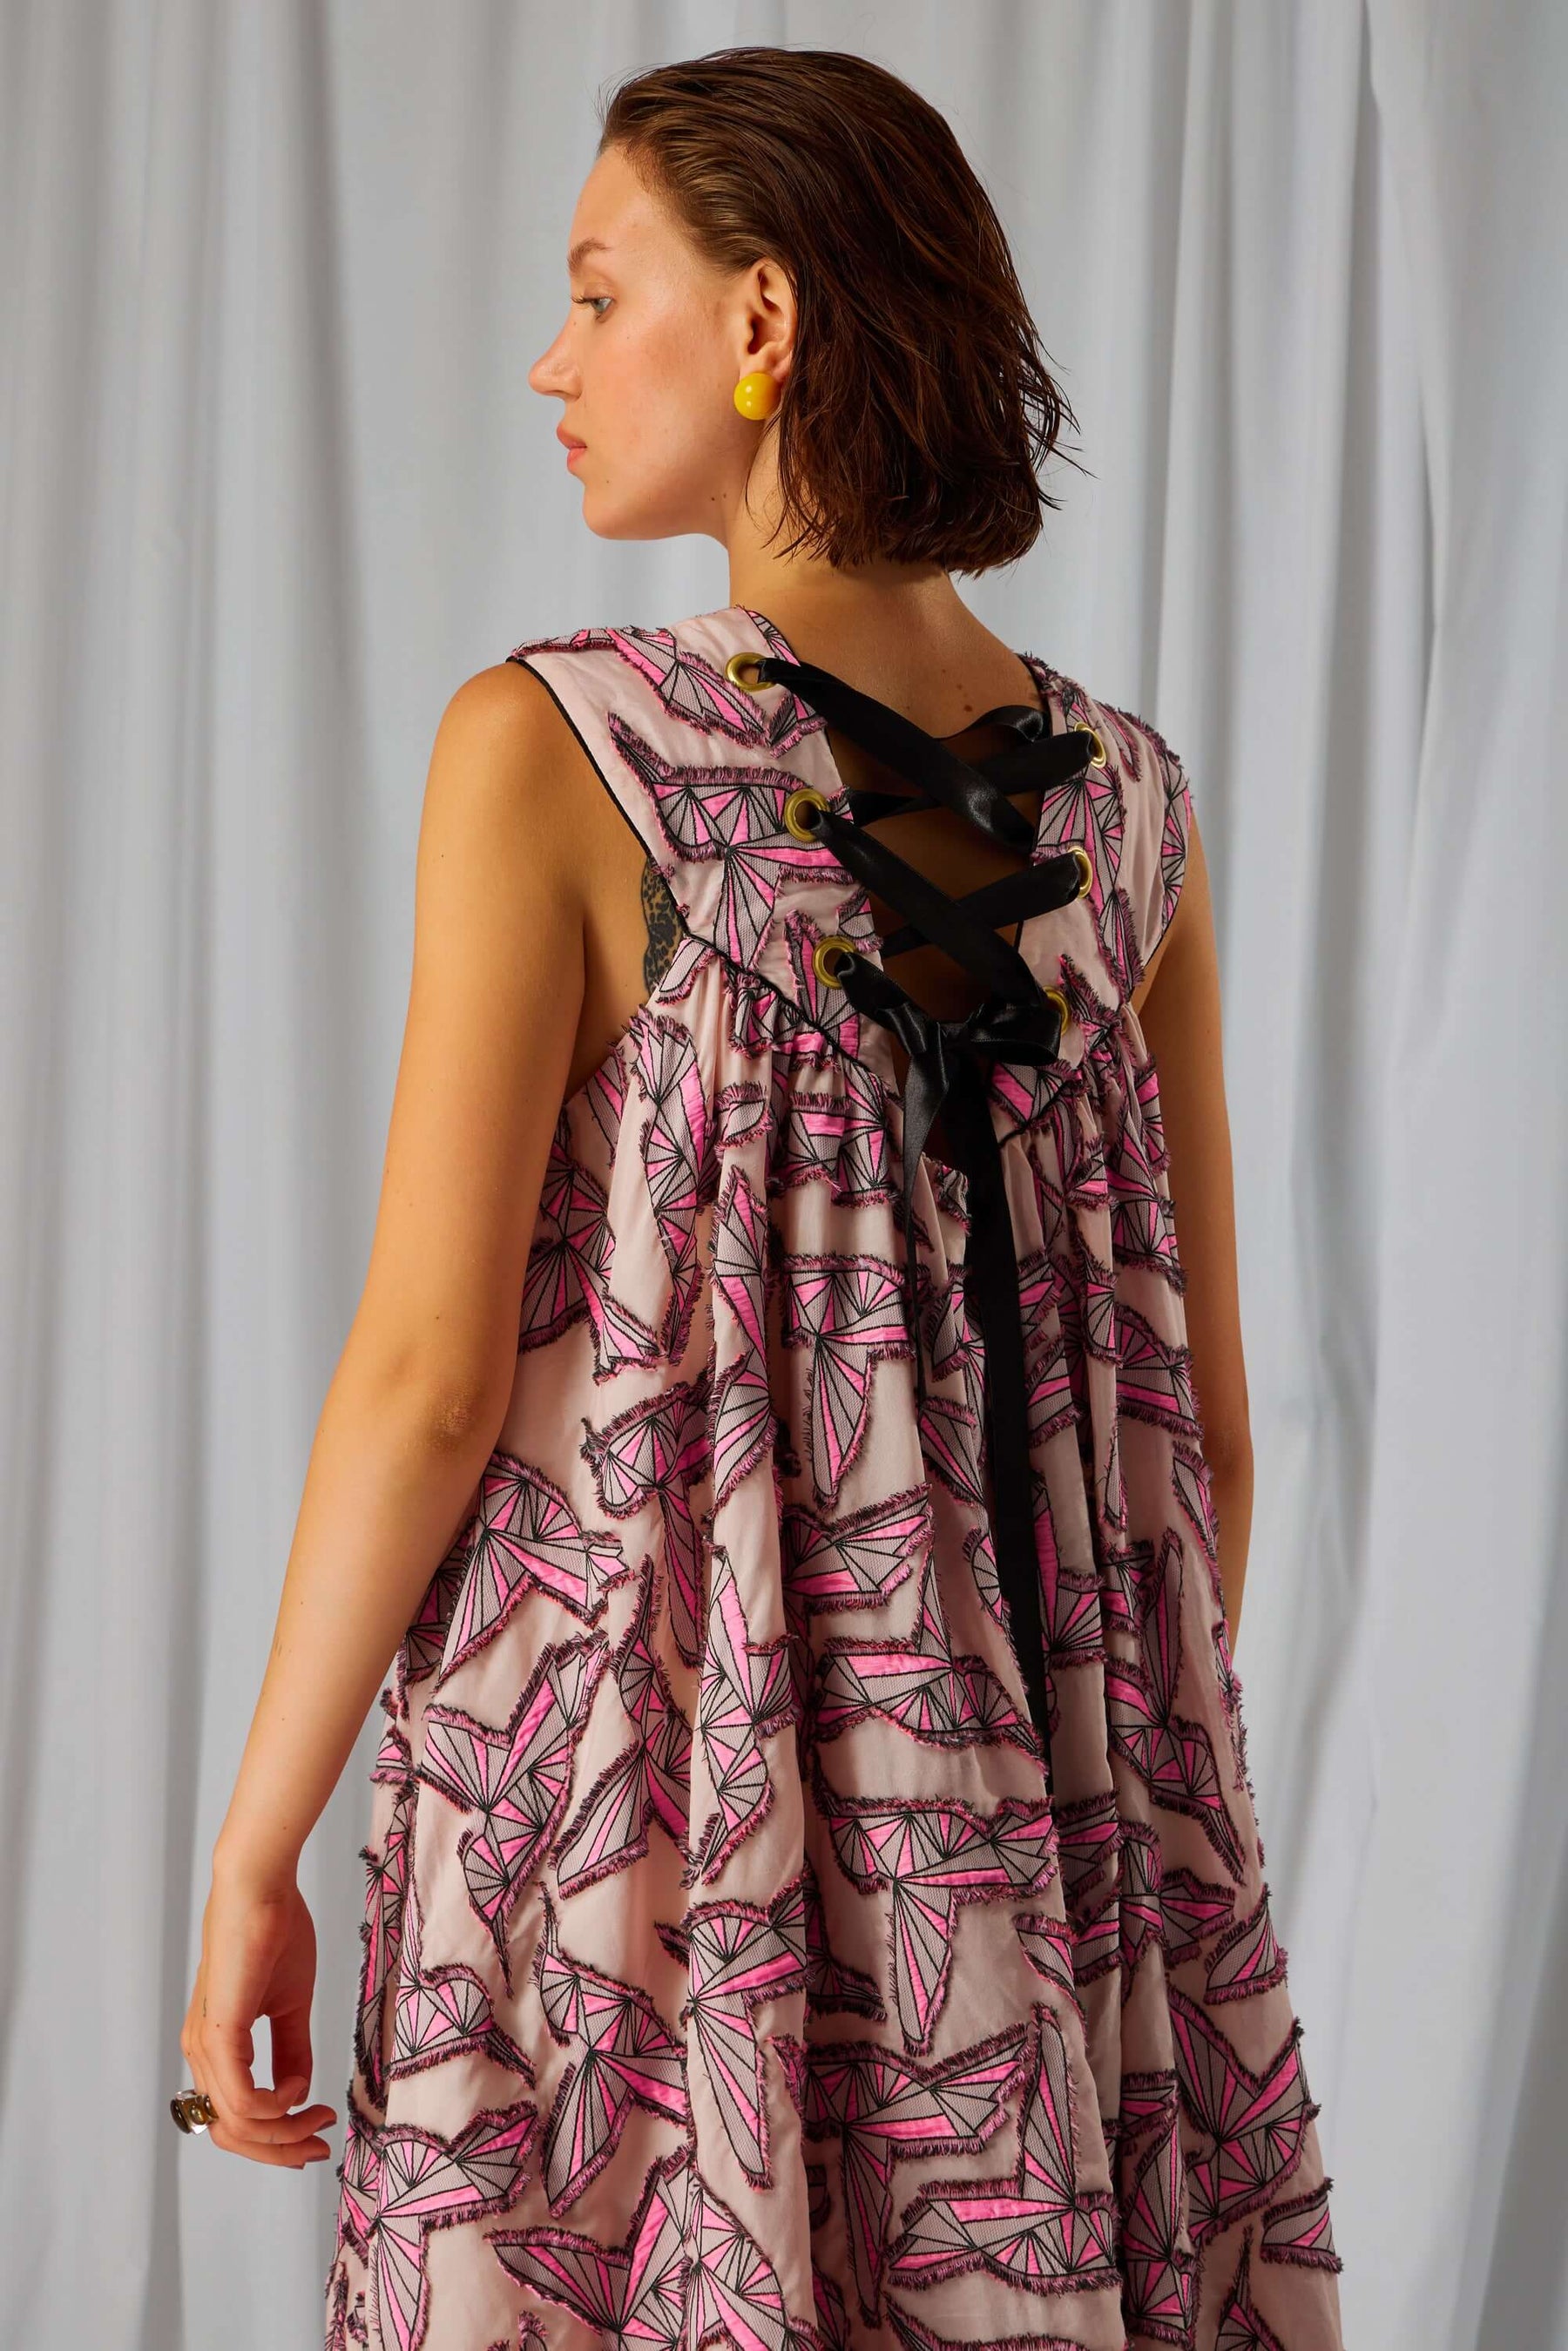 Macca dress in embroidered Hummingbird weave